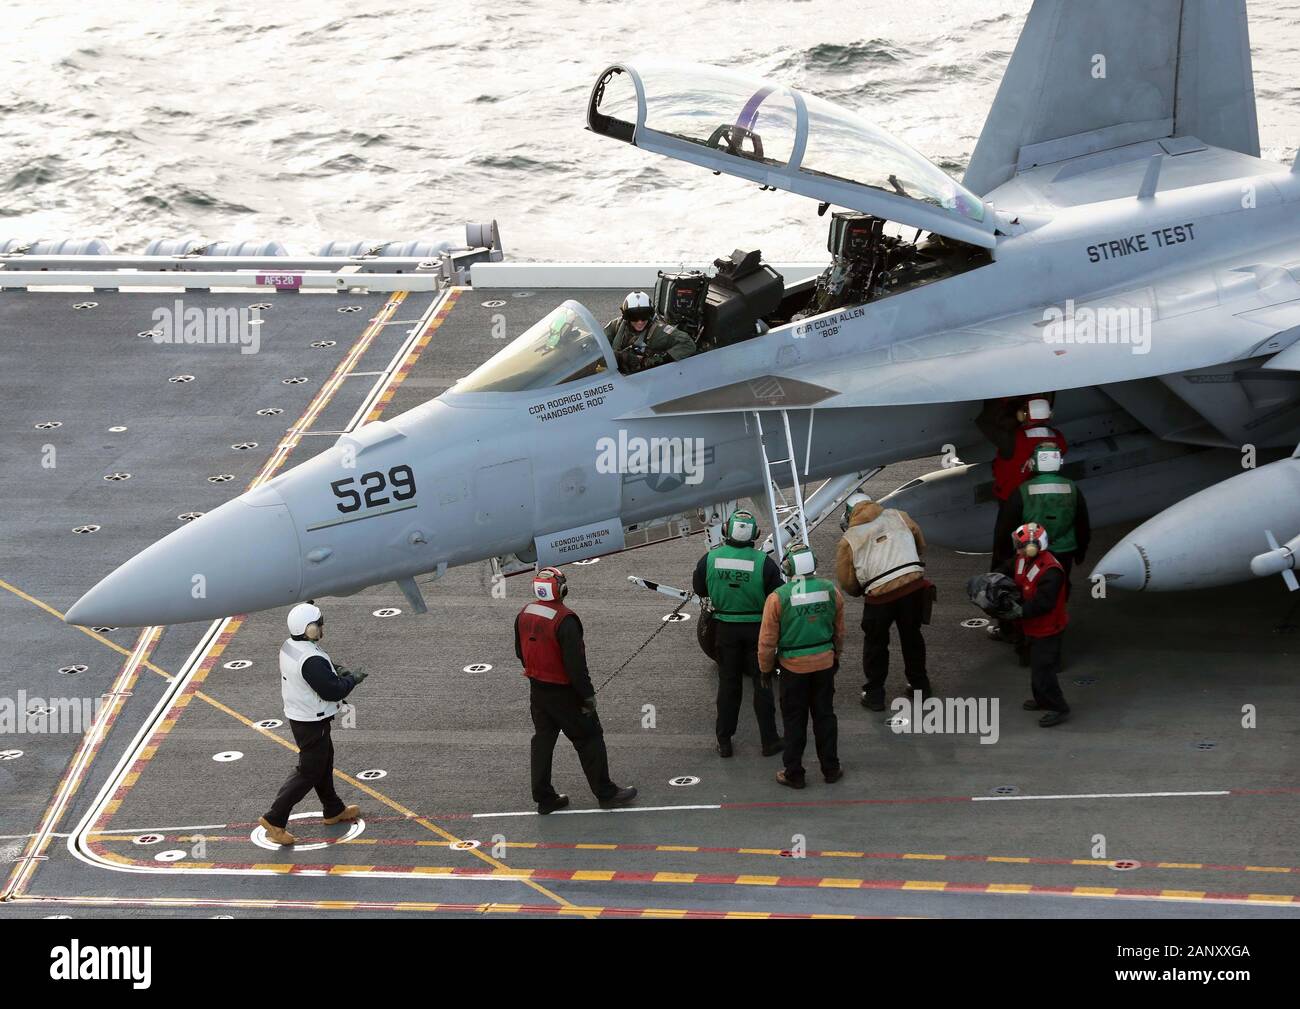 ATLANTIC OCEAN (Jan. 19, 2020) Sailors assigned to USS Gerald R. Ford (CVN 78) and the 'Salty Dogs' of Test and Evaluation (TE) Squadron (VX) 23 welcome Cmdr. Rodrigo Simoes after he lands the E/A-186 Growler. Ford is currently conducting Aircraft Compatibility Testing to further test its Electromagnetic Aircraft Launch Systems (EMALS) and Advanced Arresting Gear (AAG). (U.S. Navy photo by Mass Communication Specialist 2nd Class Indra Beaufort) Stock Photo